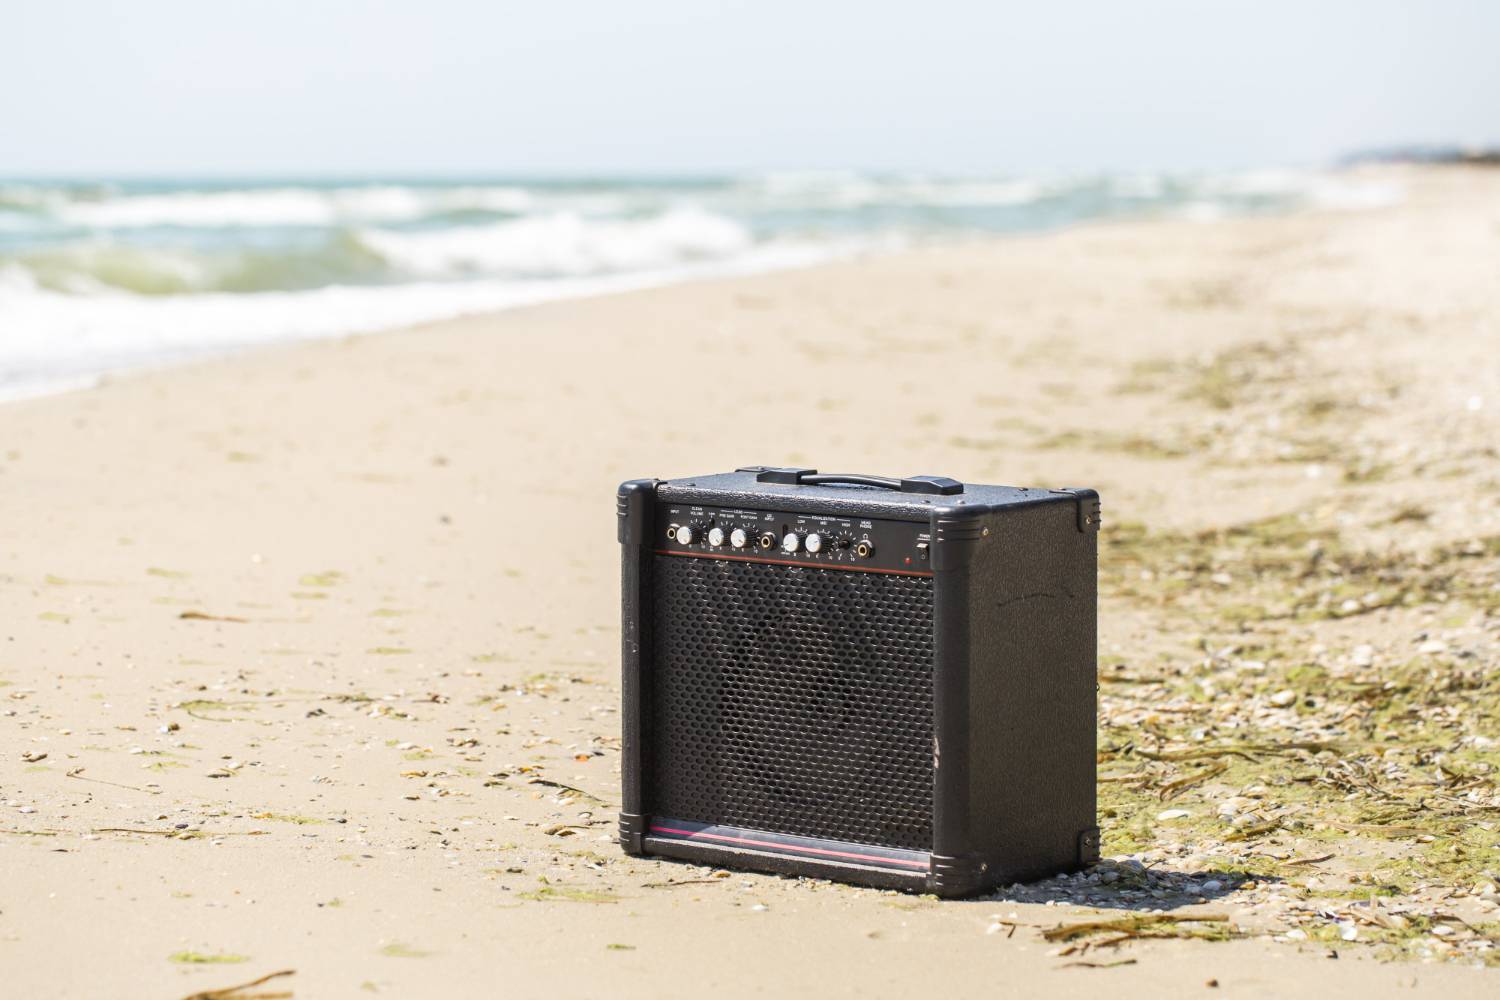 A black amplifier sits on a sandy beach near the ocean waves, ideal for amplifying the ultimate pontoon boat playlist for a fun-filled day.